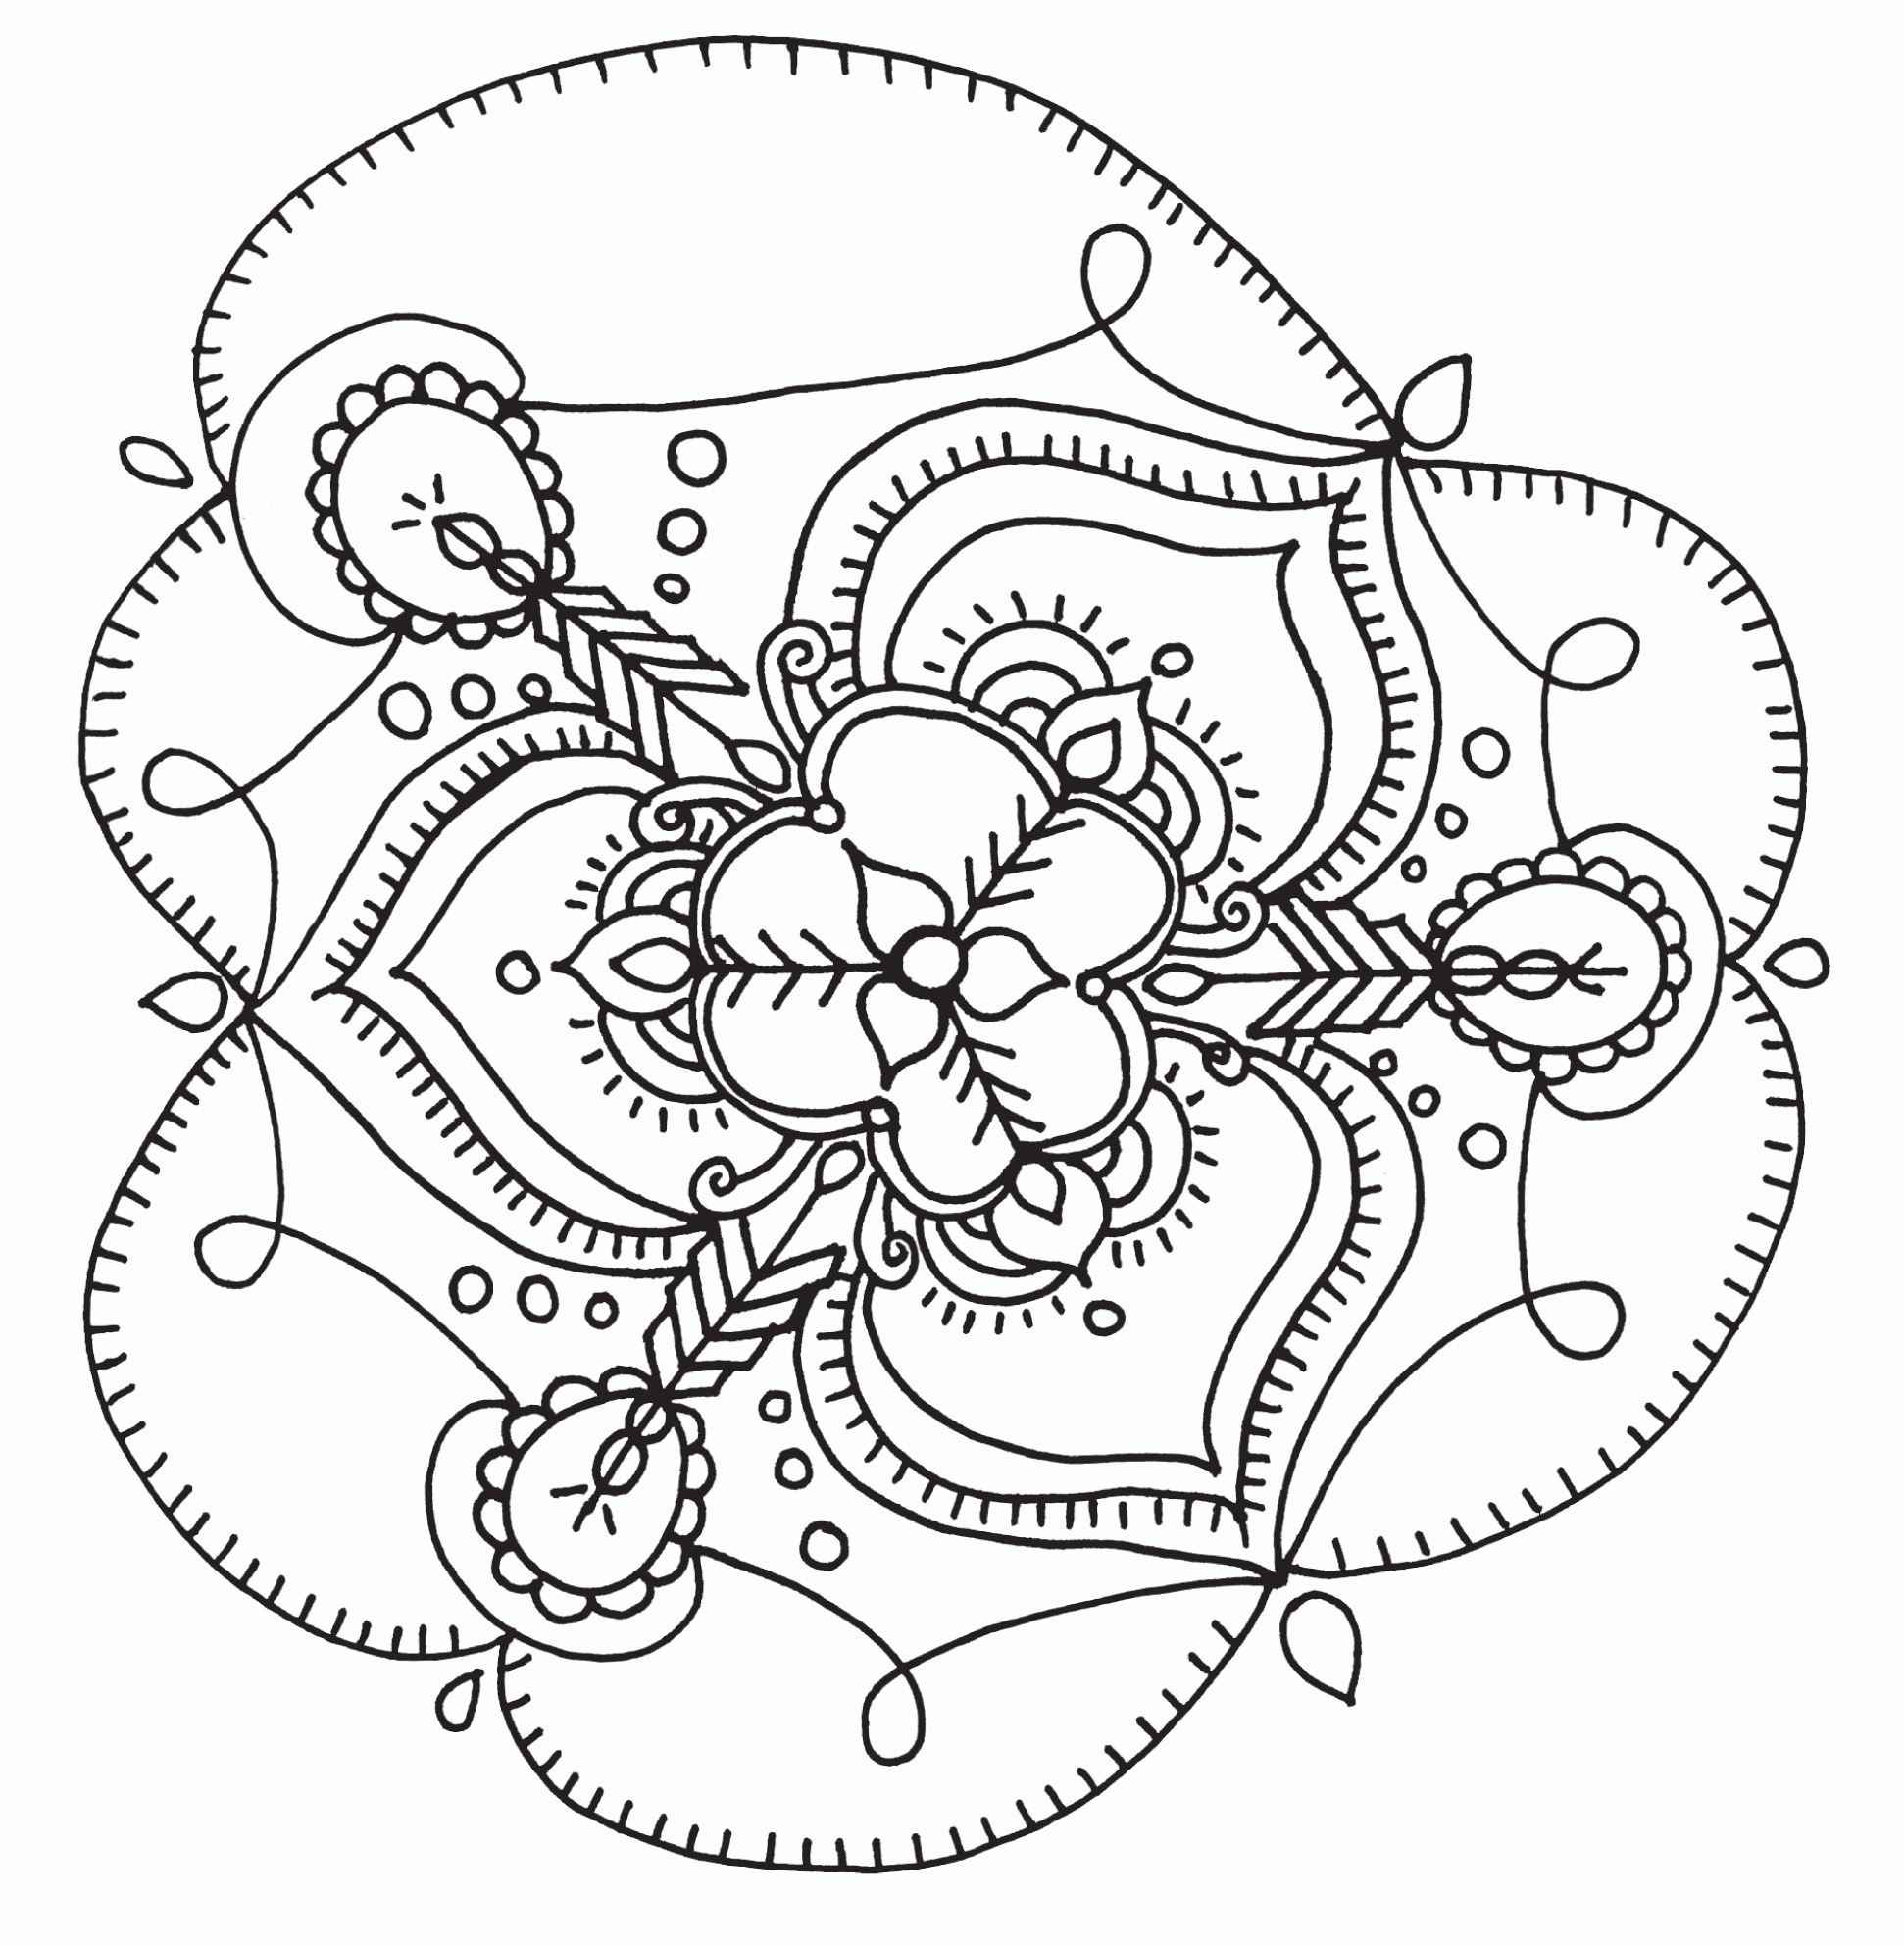 Free Printable Adult Coloring Pages Unique Abstract Image 20 ...